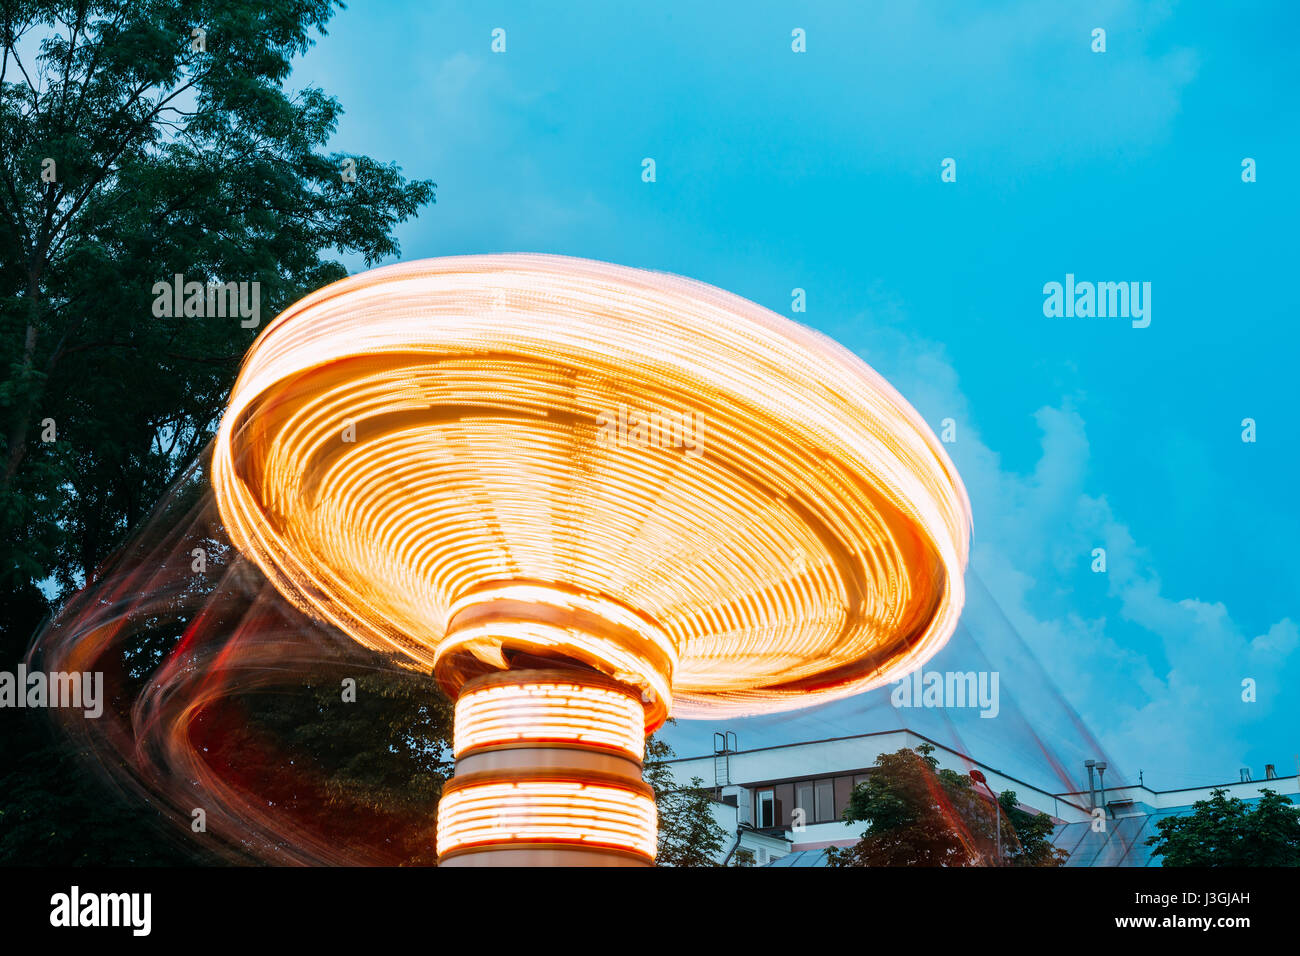 Top Disk Part Of Brightly Illuminated, Dynamic Energy Rotating High Speed Carousel Merry-Go-Round With Blurred Motion Effect Around. Blue Evening Sky  Stock Photo